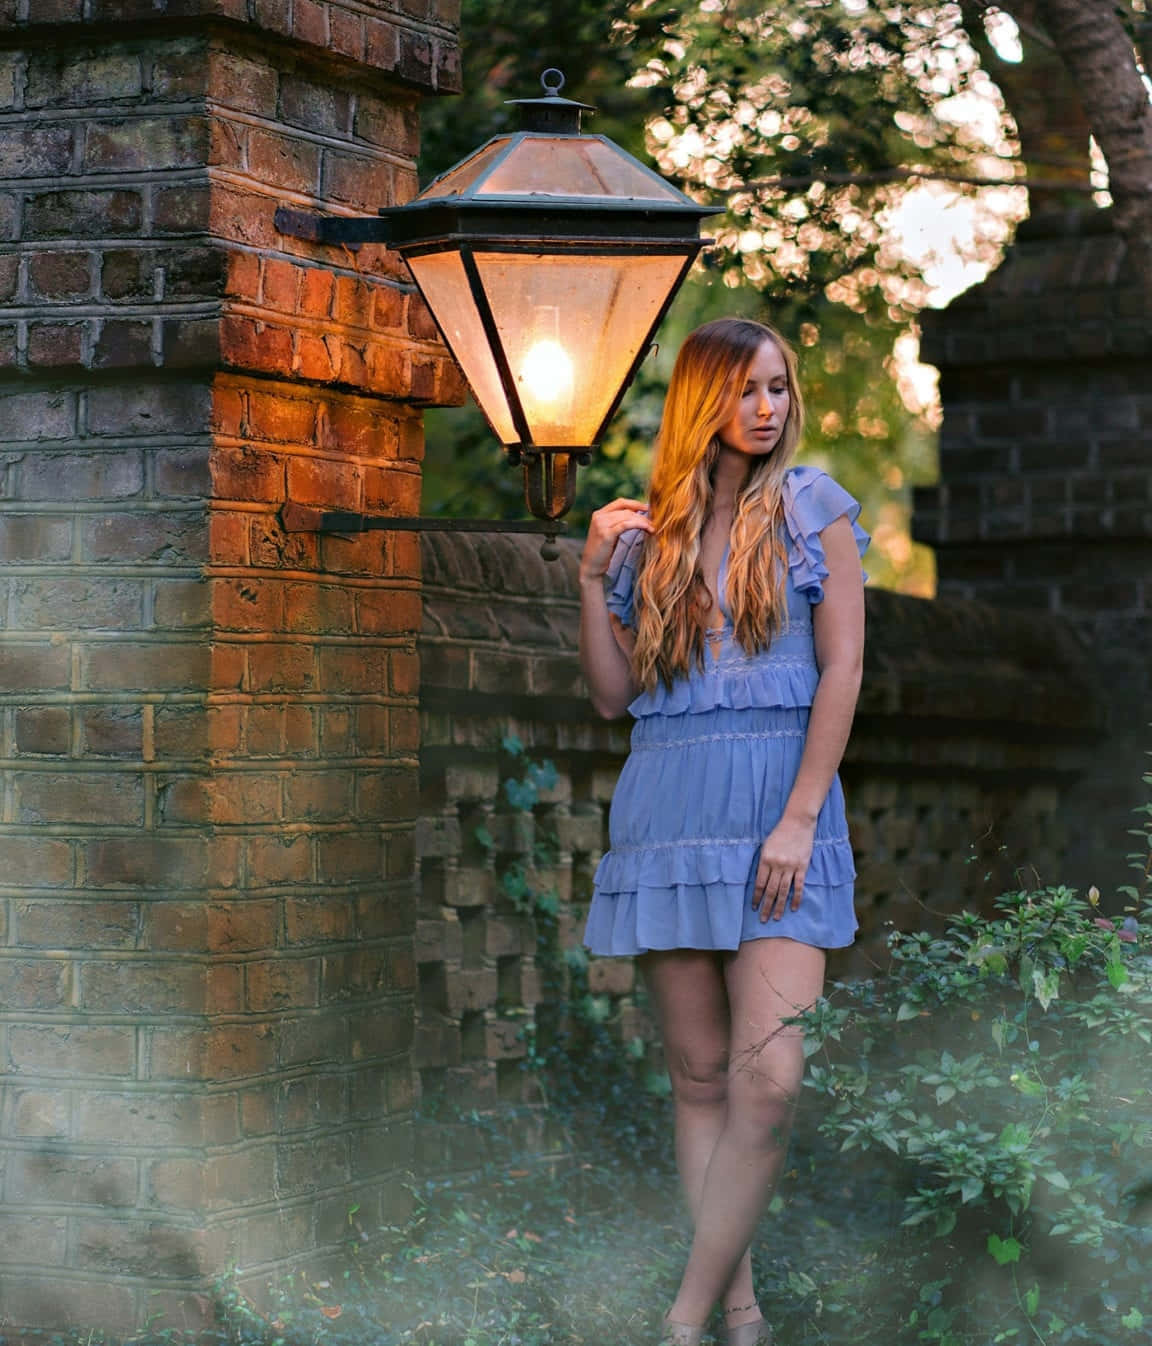 A Woman In A Blue Dress Standing Next To A Brick Wall